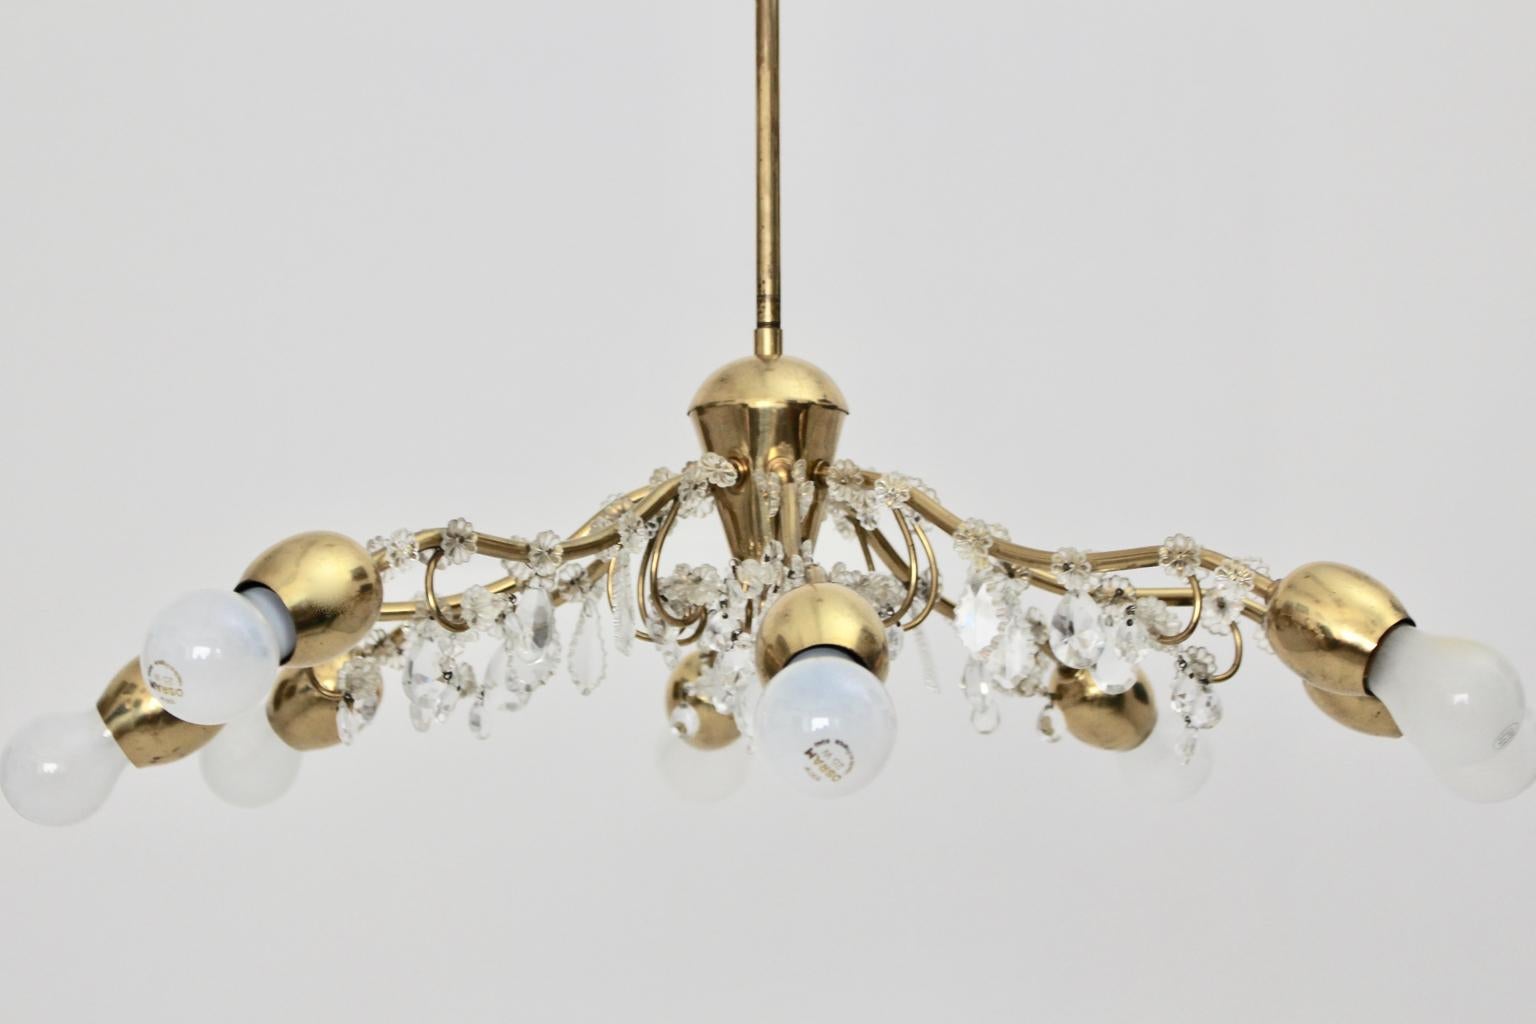 This lovely chandelier, which was designed and manufactured by the firm J & L Lobmeyr Vienna in the 1950s shows a brass chandelier frame.
Furthermore the brass chandelier frame with 8 arms and E 27 sockets was been decorated with cut Swarovski